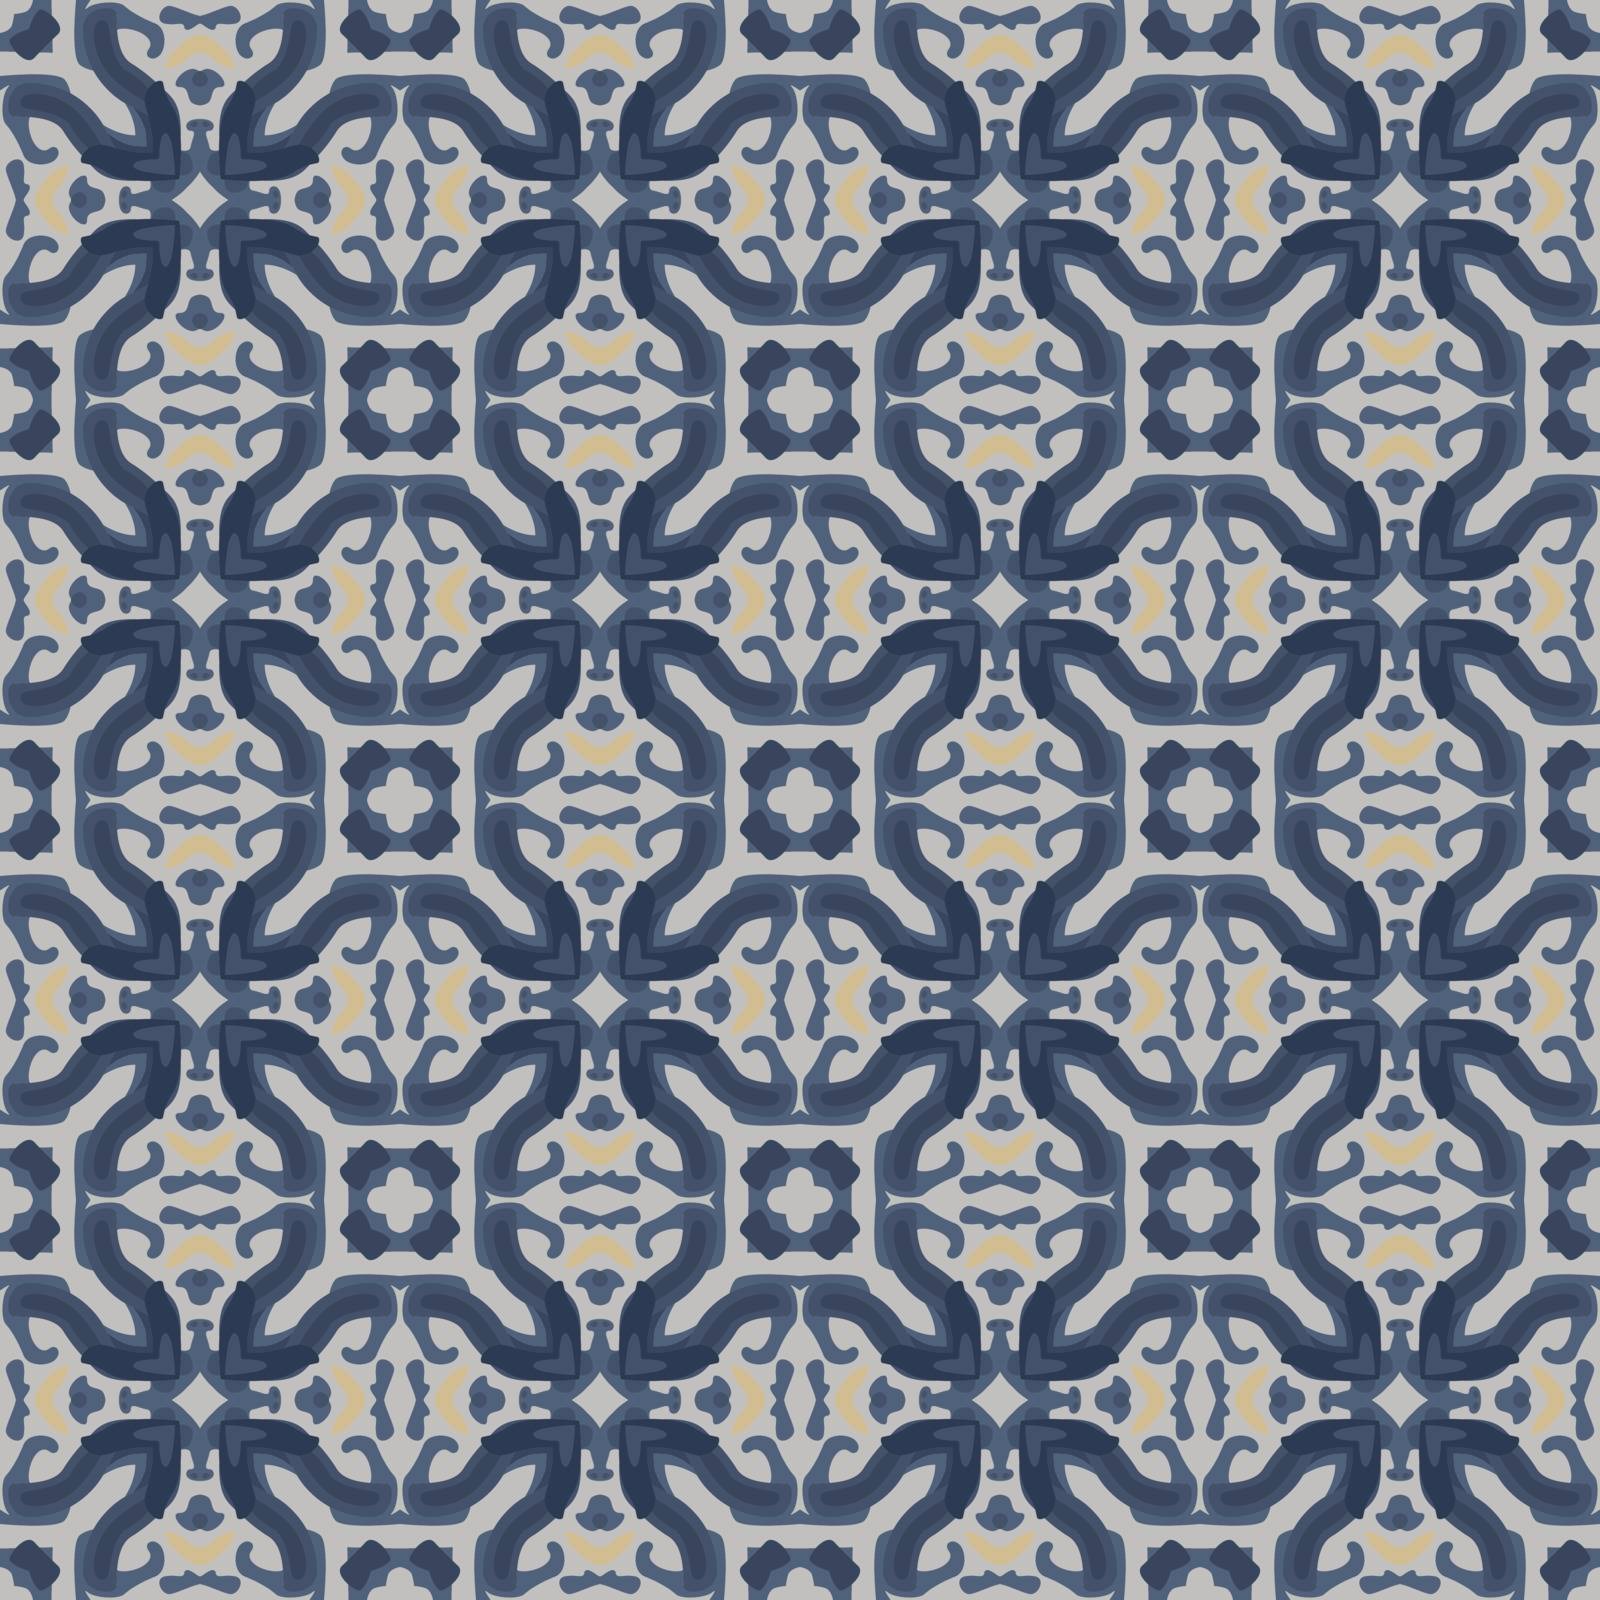 Seamless illustrated pattern made of abstract elements in white, yellow and blue